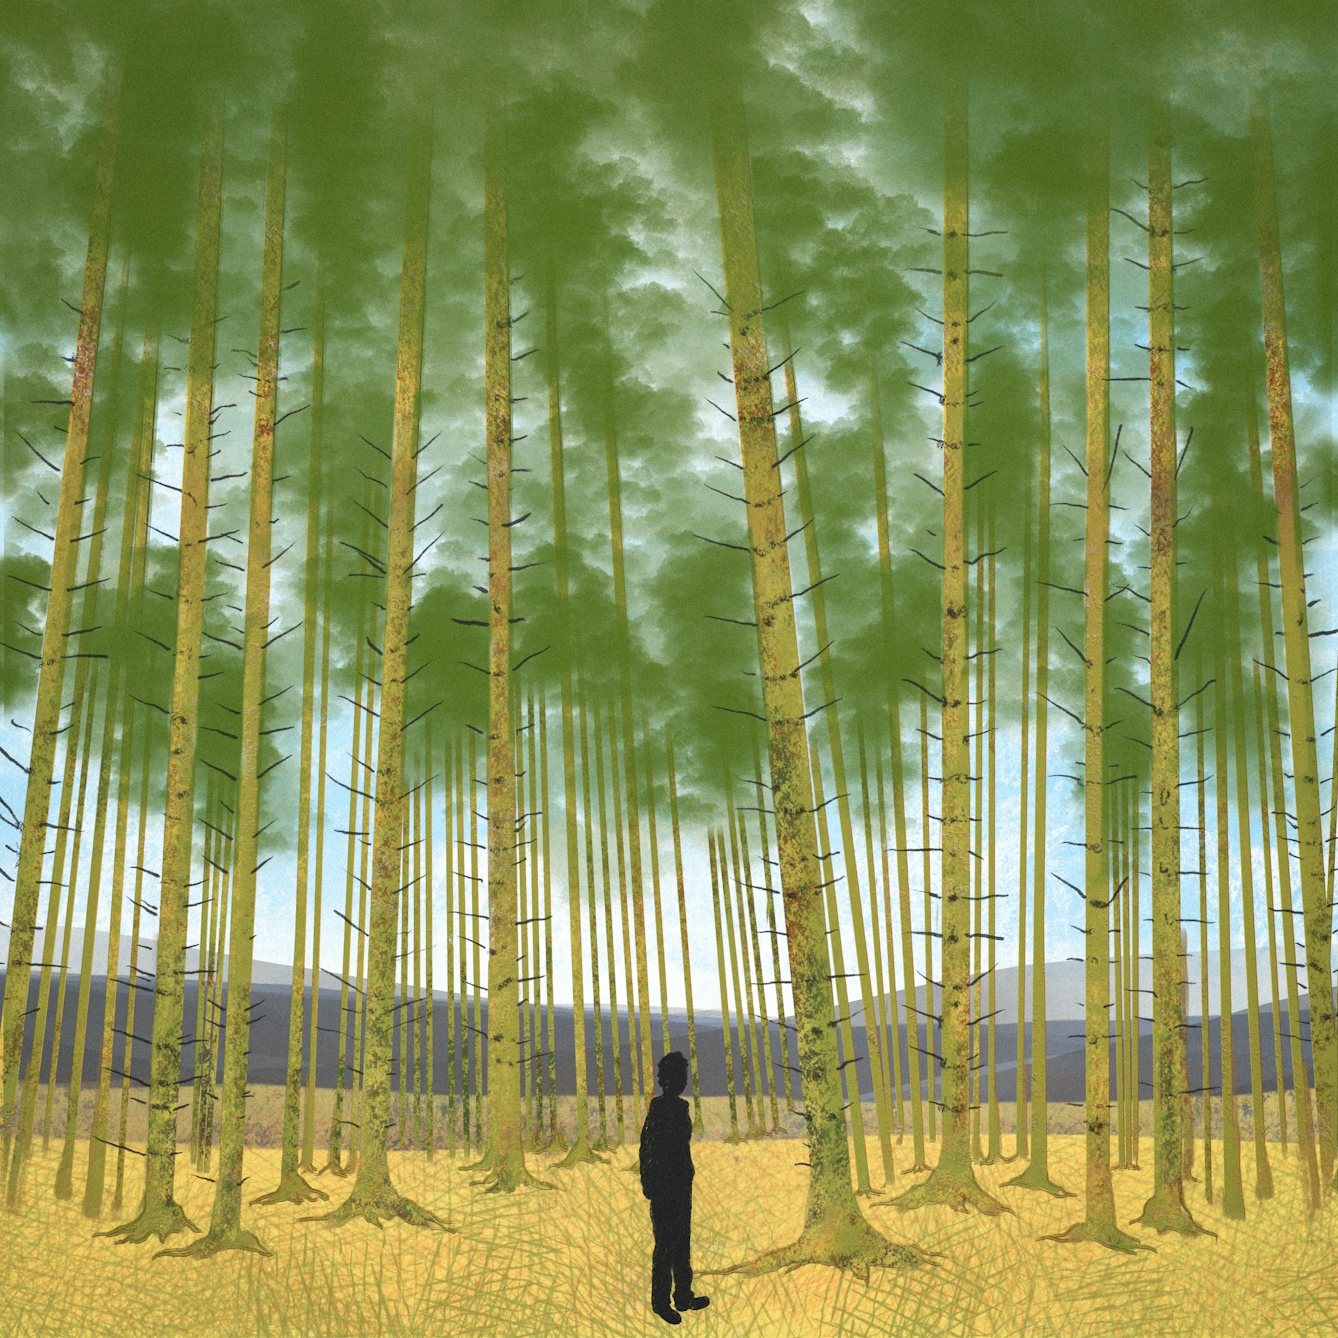 A digital illustration of an isolated figure within a tall forest. The figures is shown in silhouette and is dwarfed by the trees surrounding them, in the distance there are rolling hills across the horizon.